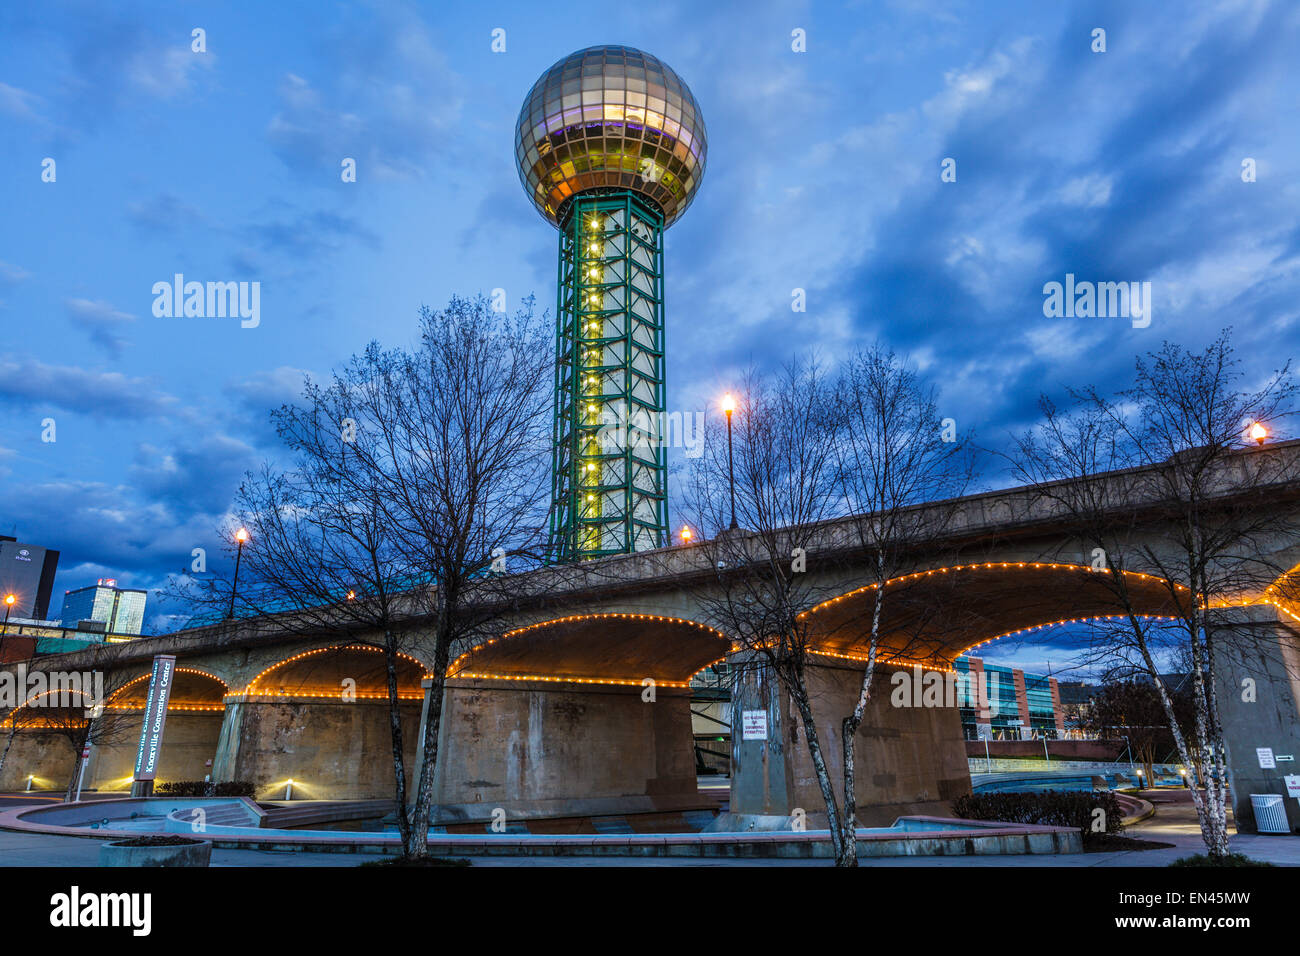 Sunsphere in fiera mondiale del parco, Knoxville, Tennessee. Foto Stock